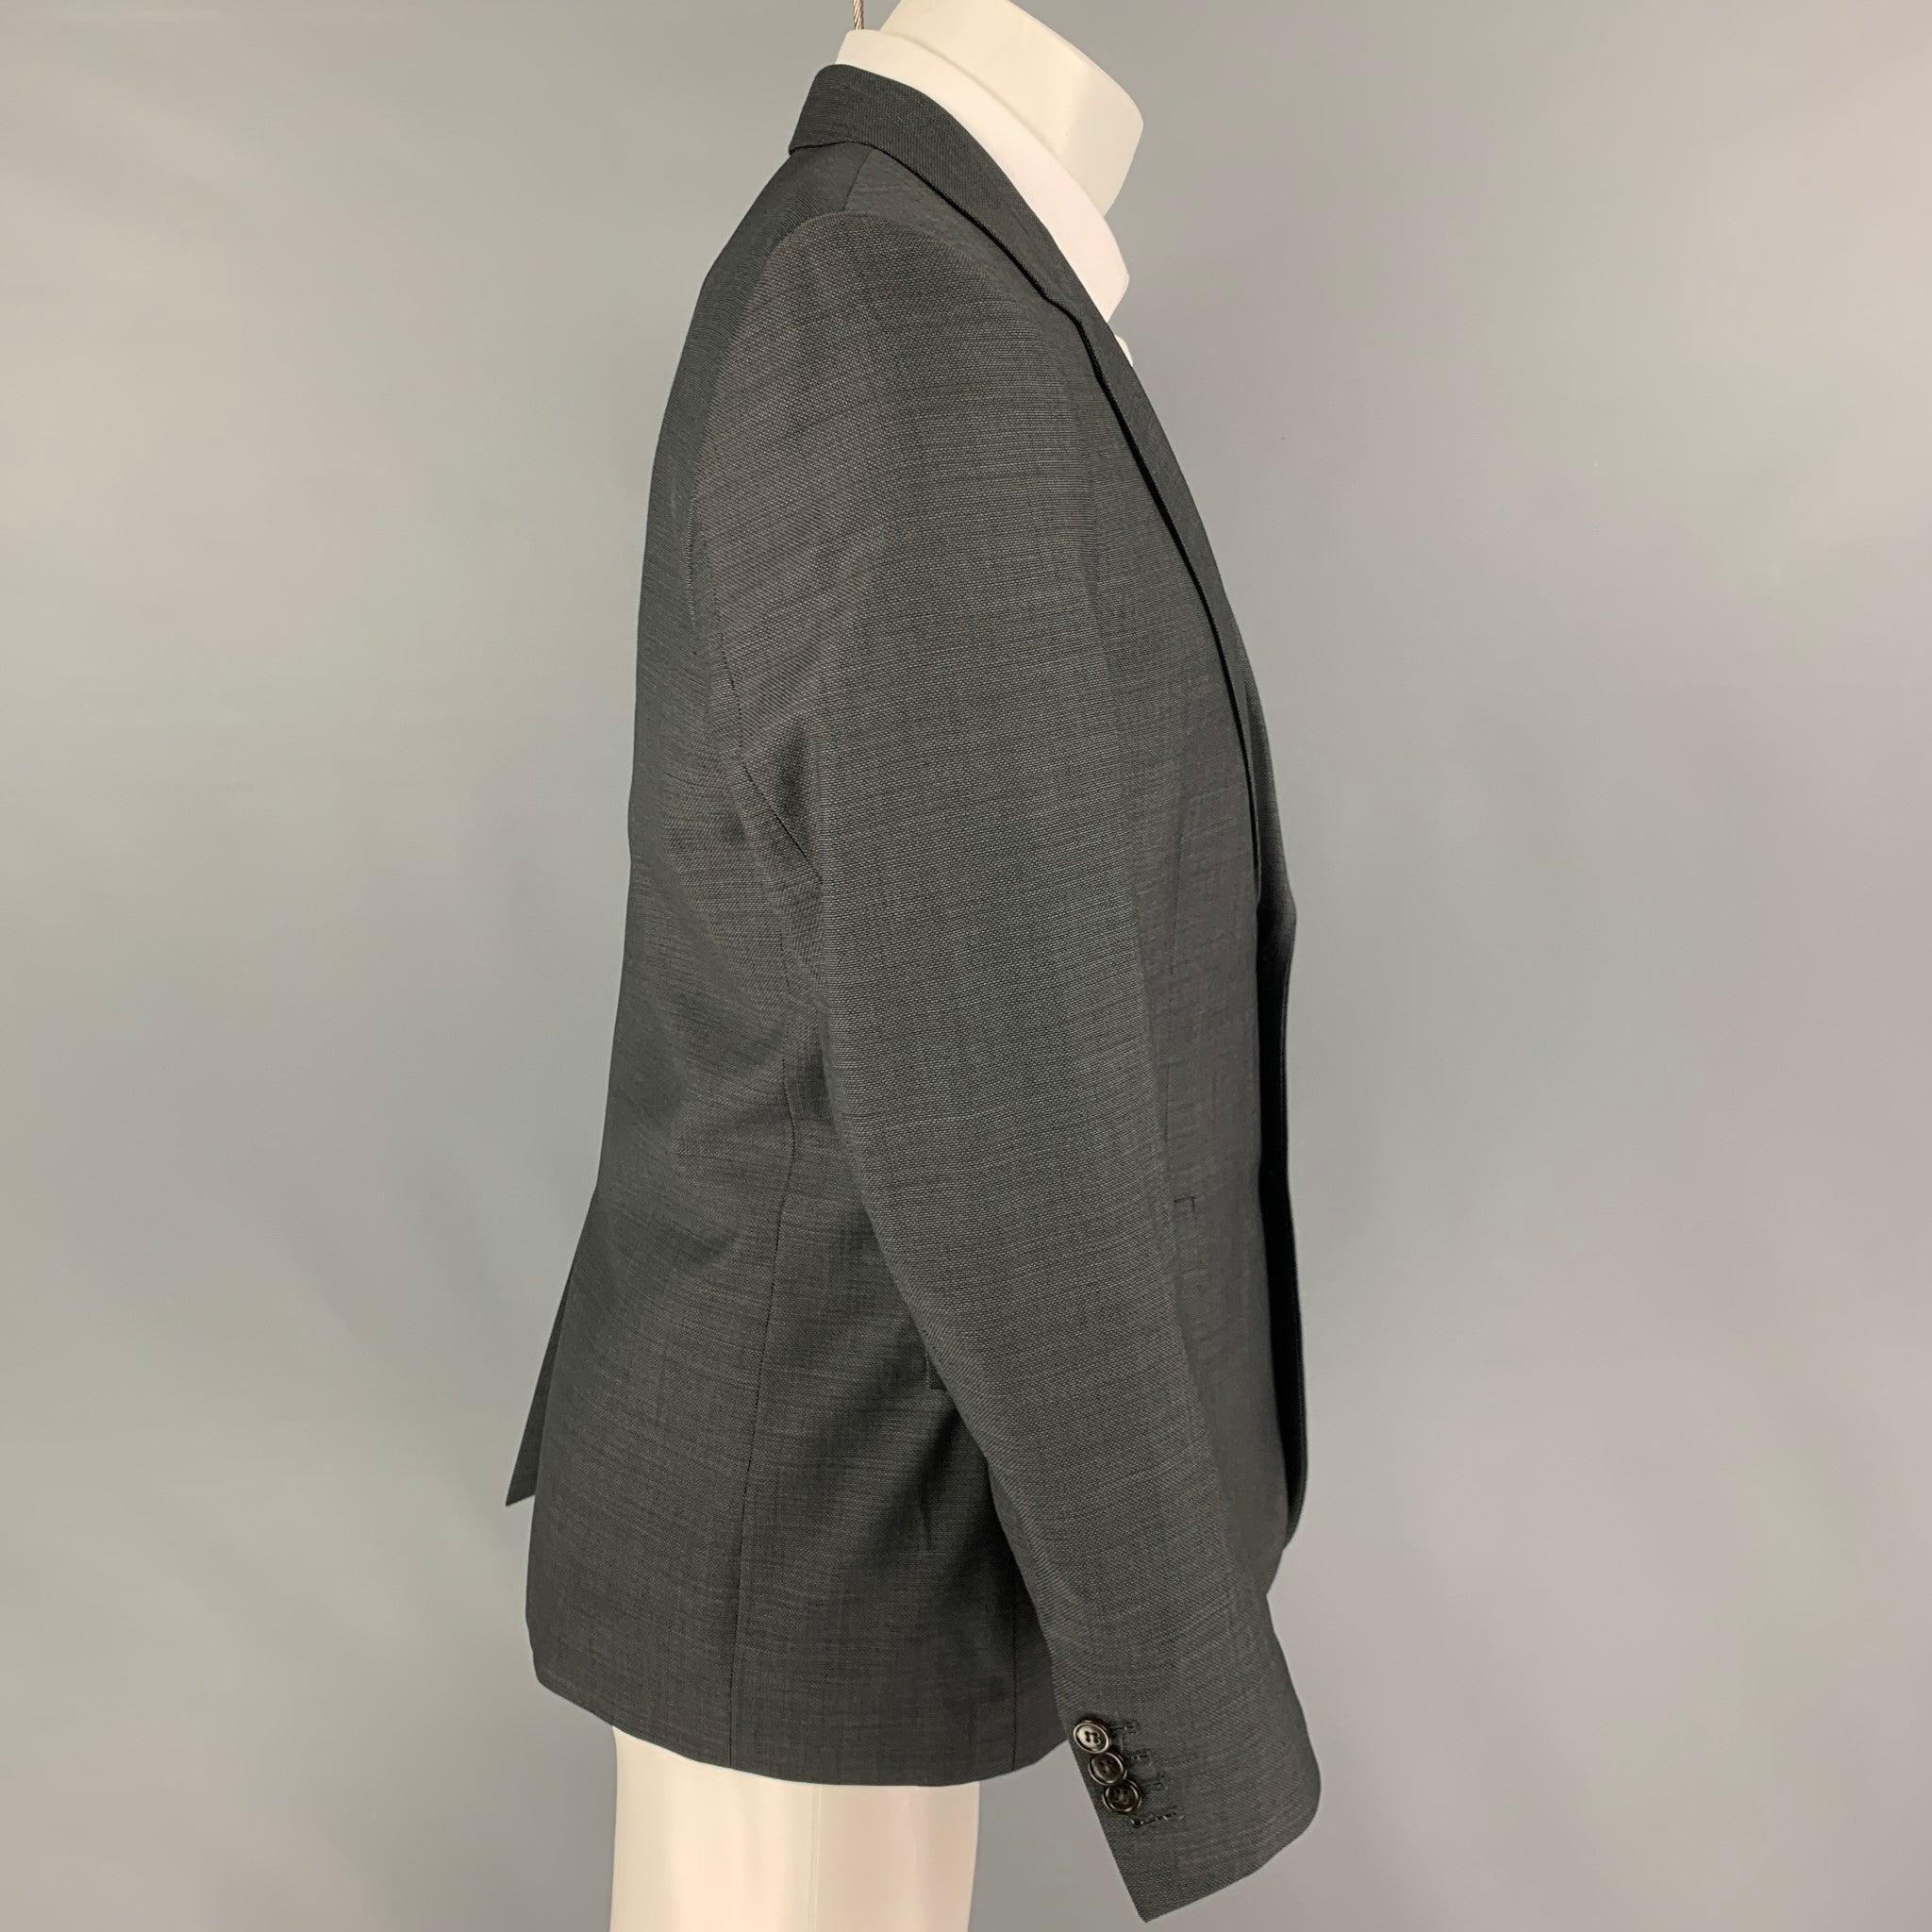 THE KOOPLES
sport coat comes in a charcoal wool with a full liner featuring a notch lapel, flap pockets, single back vent, and a double button closure.Very Good Pre-Owned Condition.  

Marked:   50 

Measurements: 
 
Shoulder: 18 inches  Chest: 40